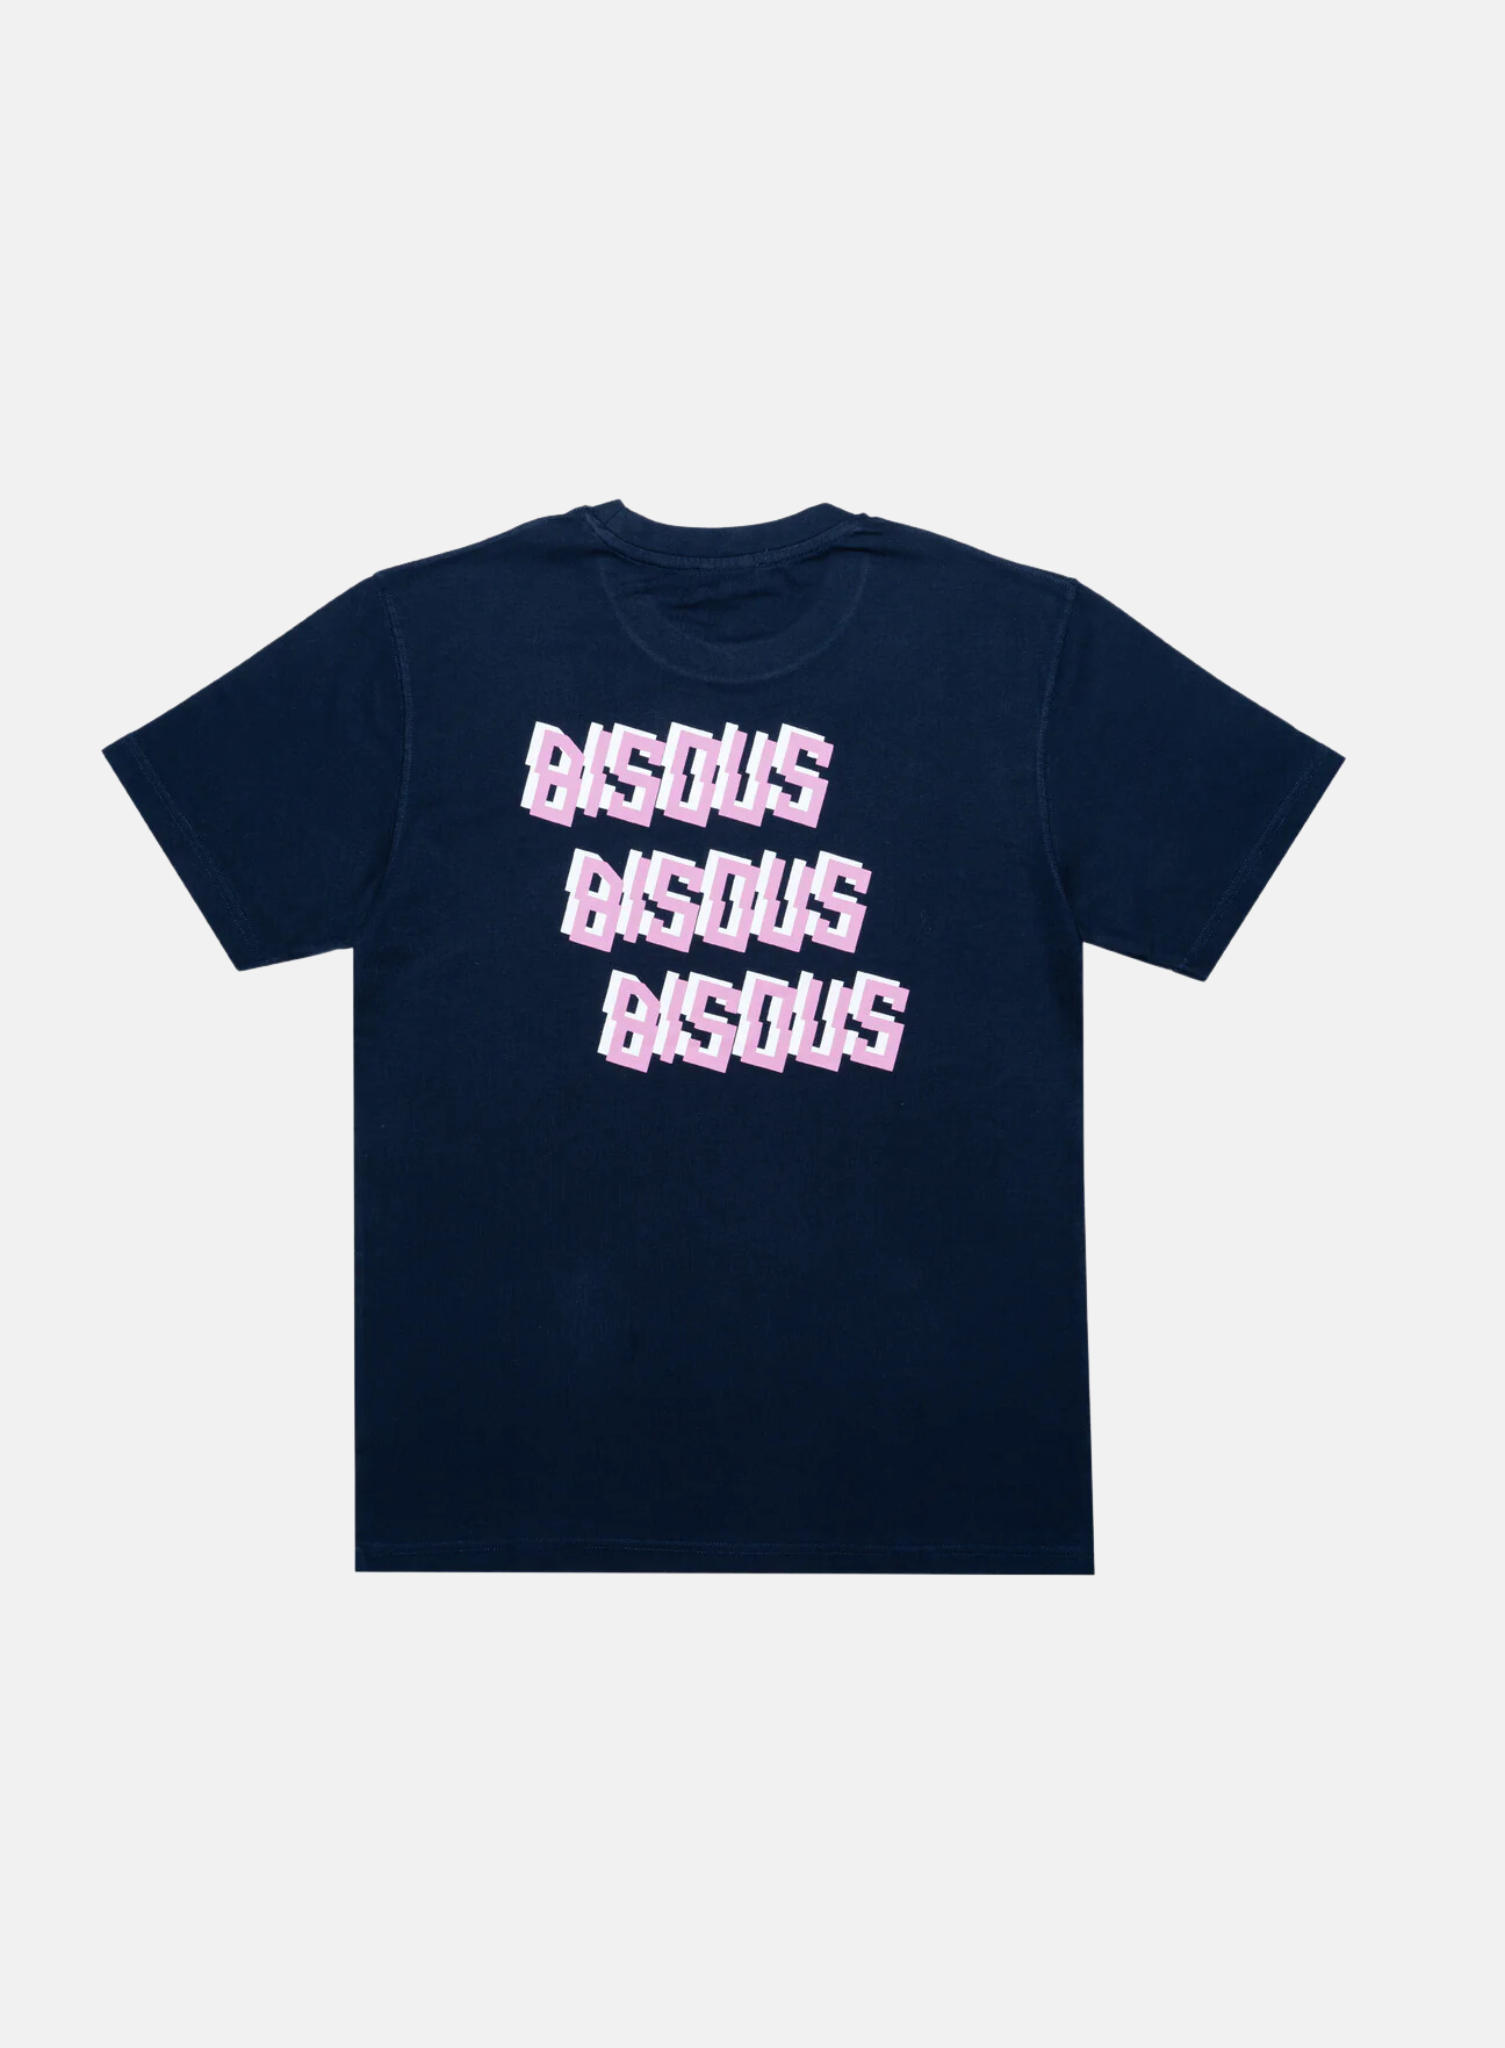 SS Bisous x3 Tee Navy